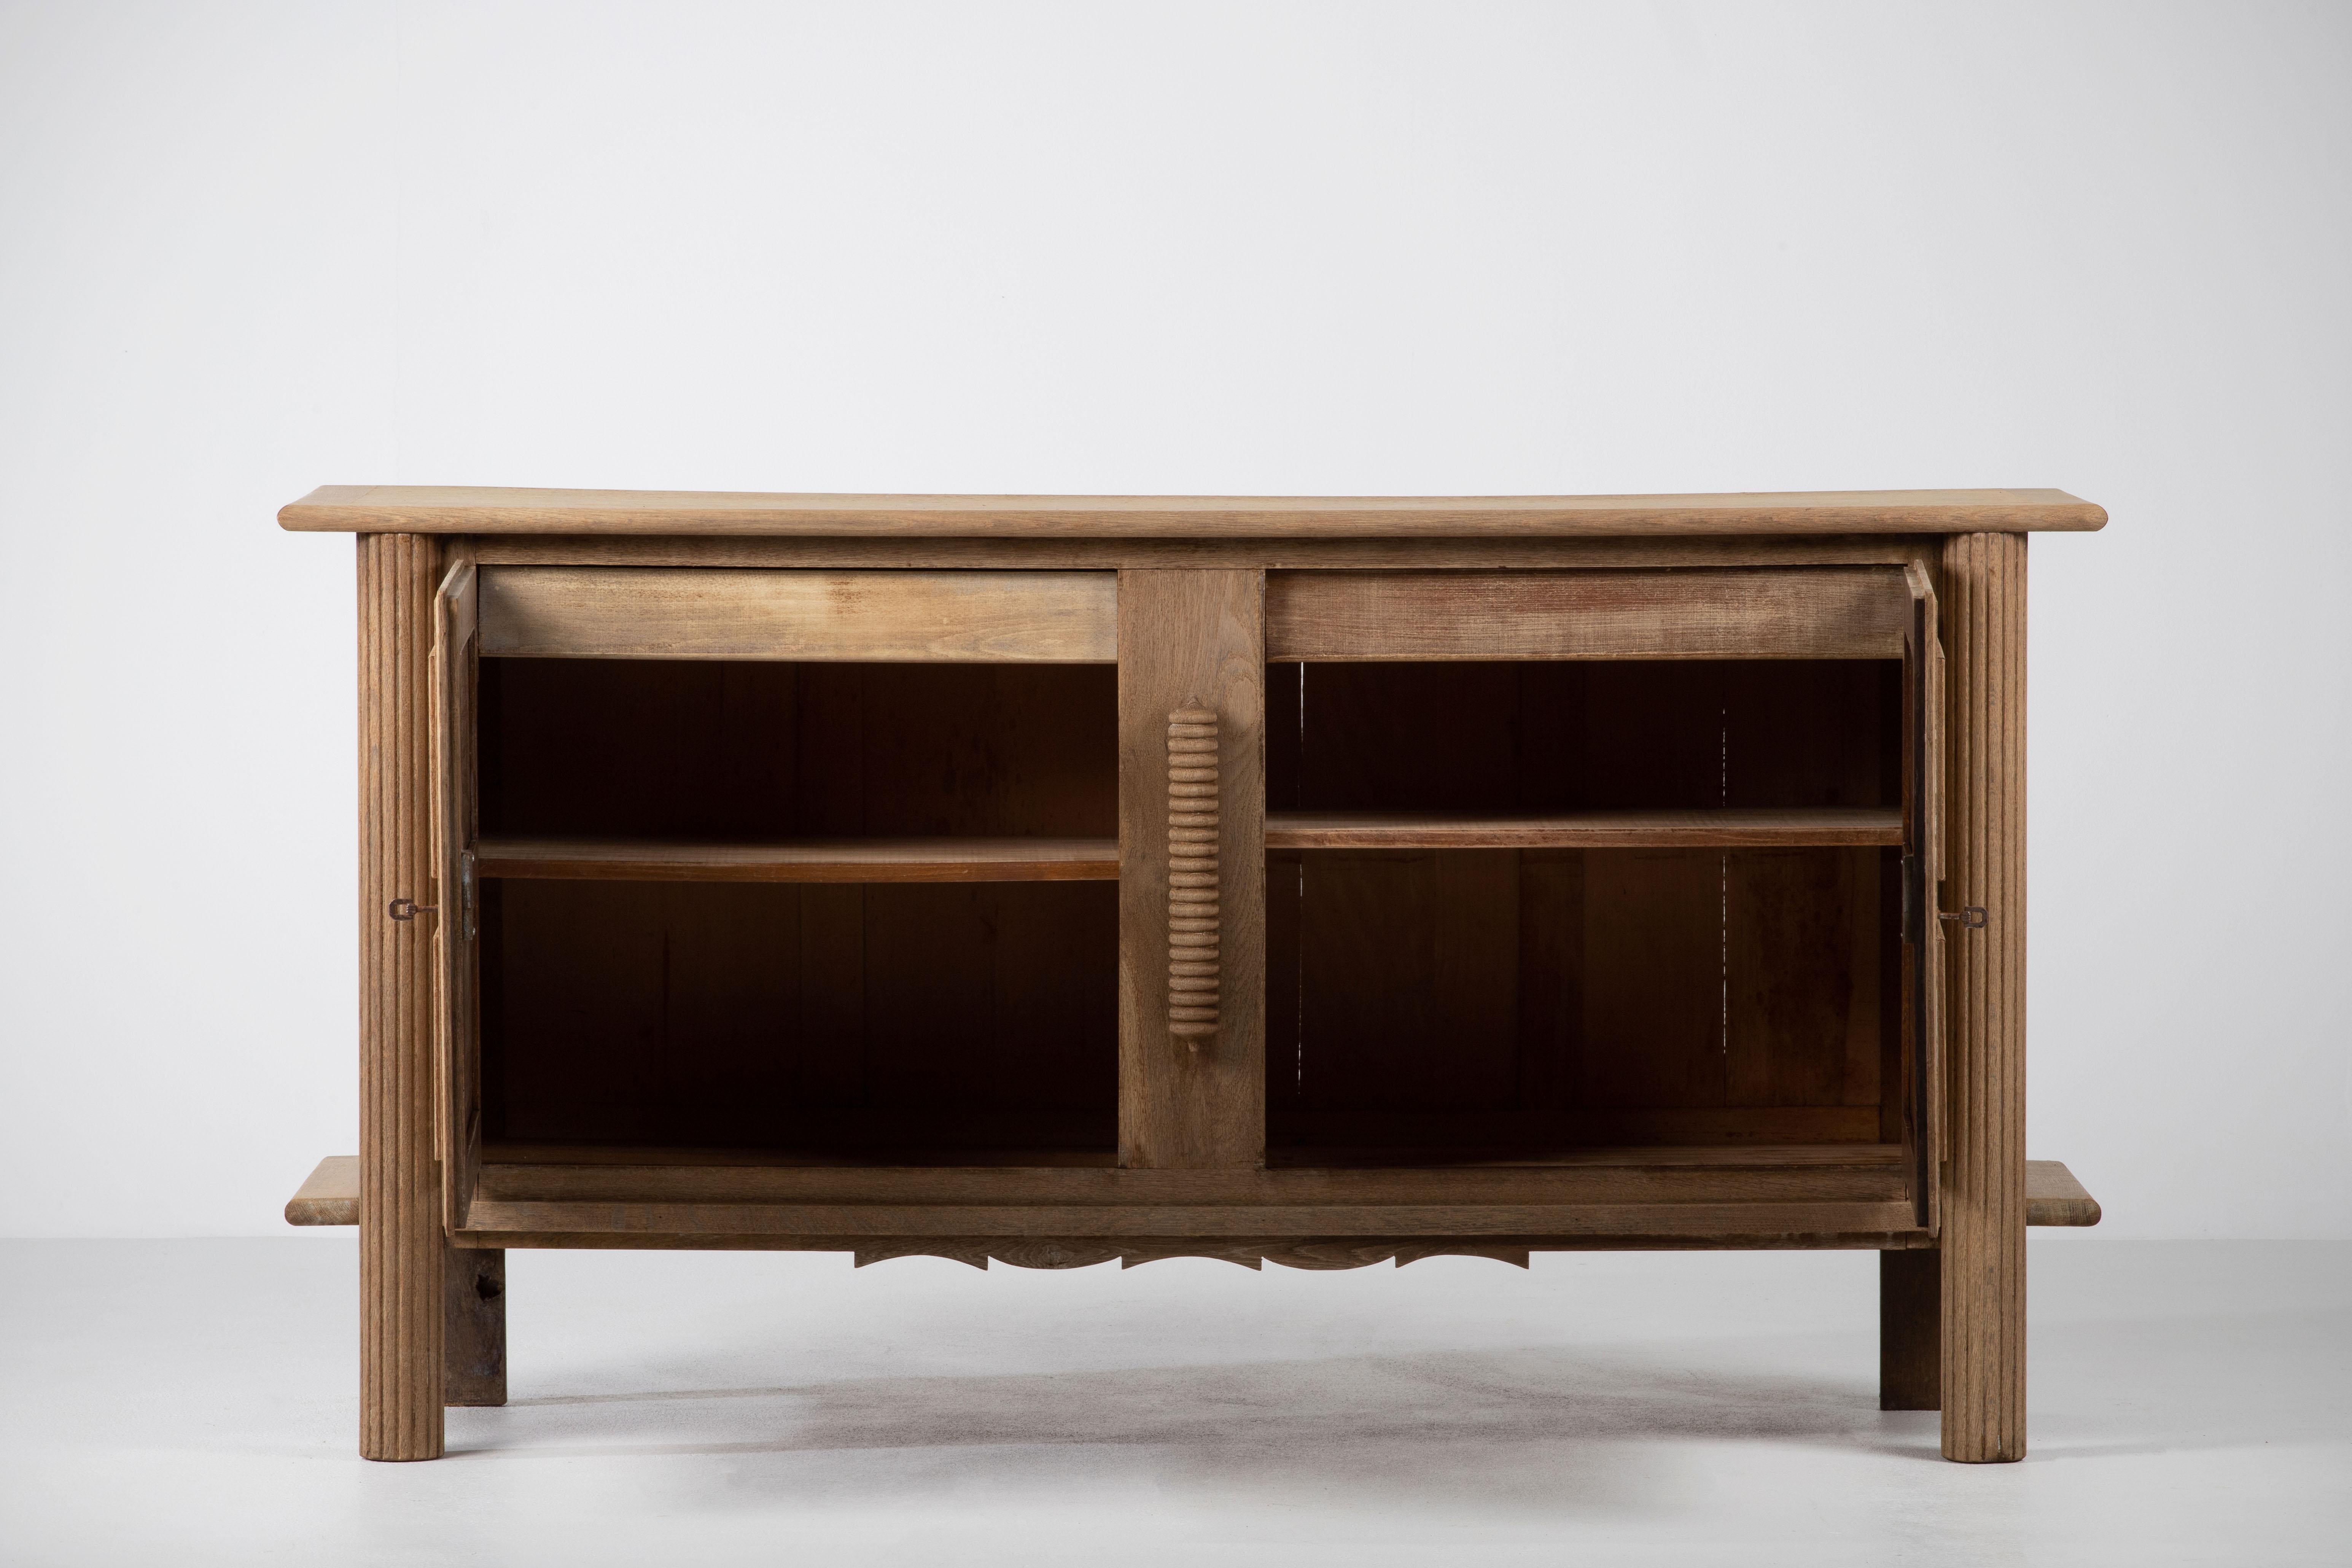 Credenza, solid oak, France, 1940s.
The credenza consists of two storage facilities and covered with very detailed designed doors.
We offer this piece in a bleached finish.